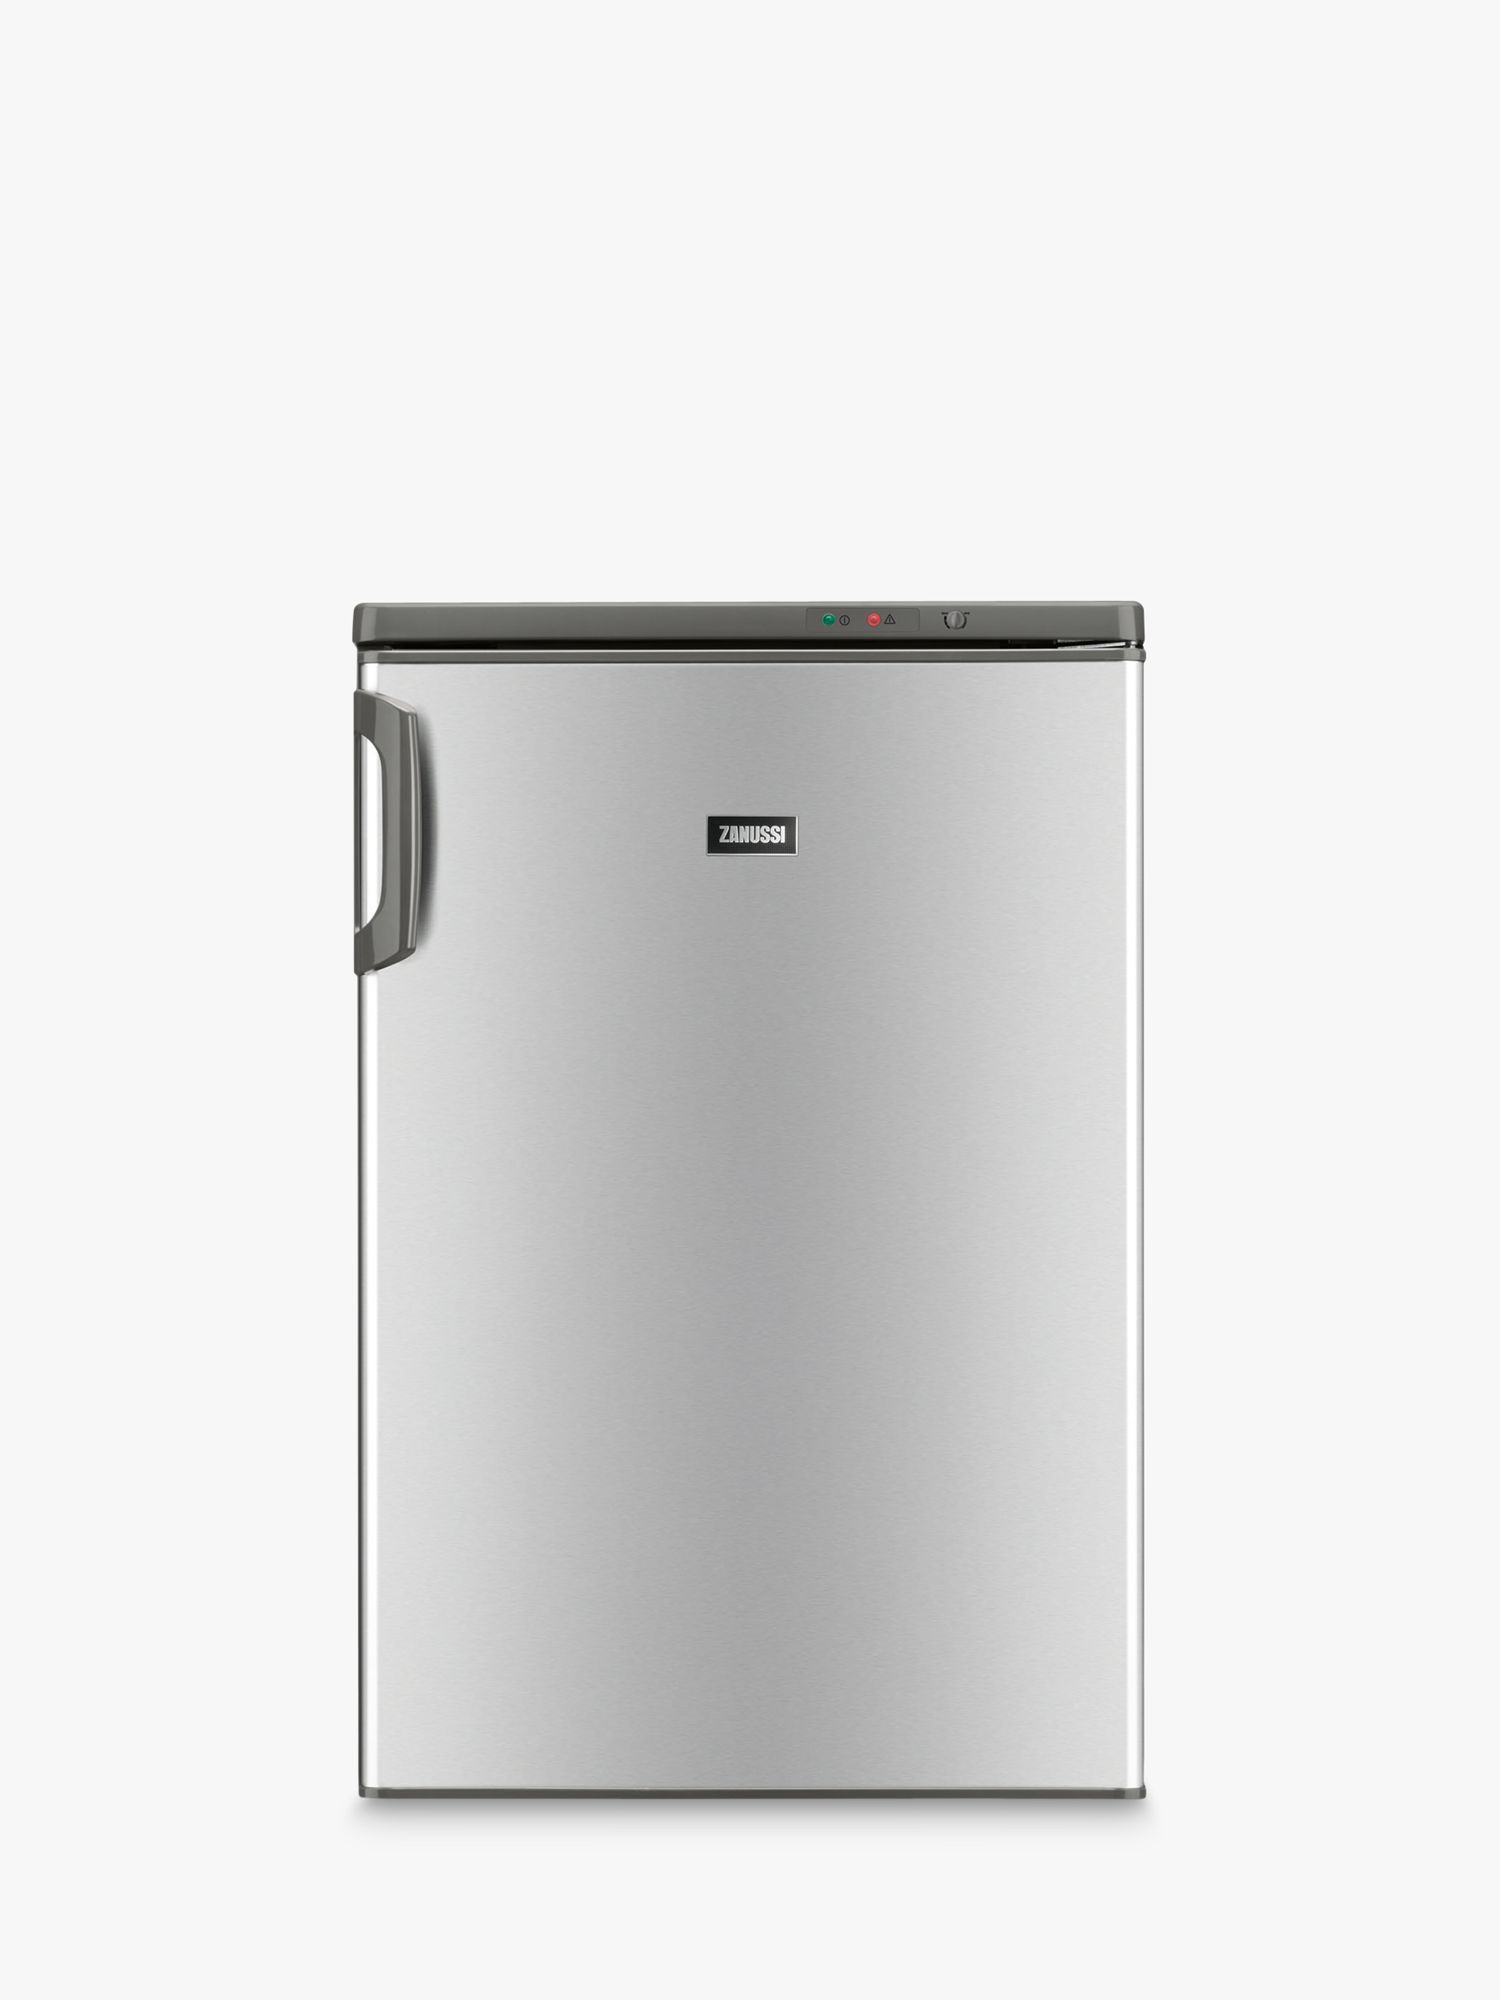 Zanussi ZFT11105XV Freestanding Freezer, A+ Energy Rating, 55cm Wide, Stainless Steel Look